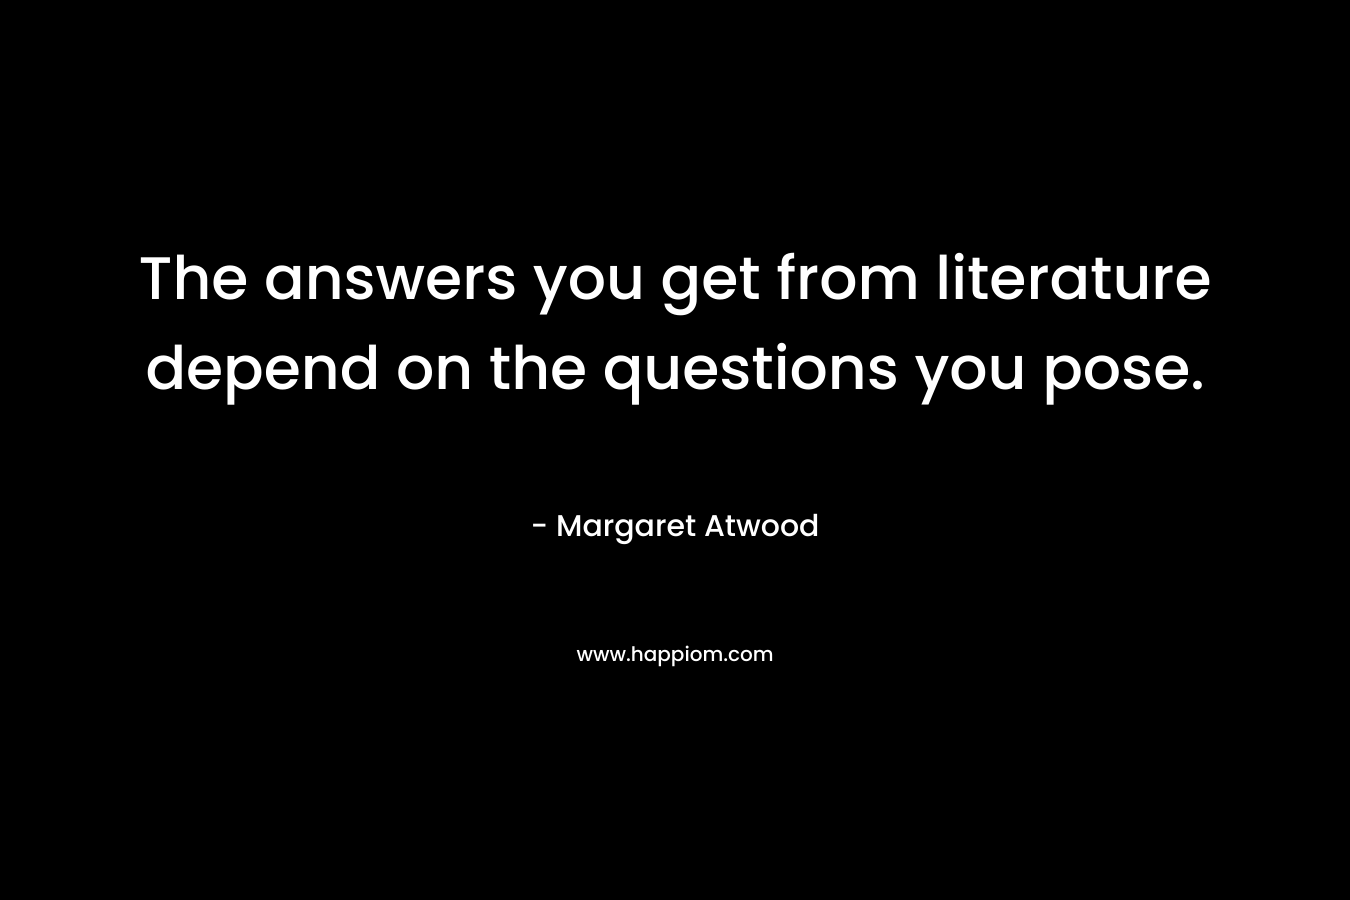 The answers you get from literature depend on the questions you pose.